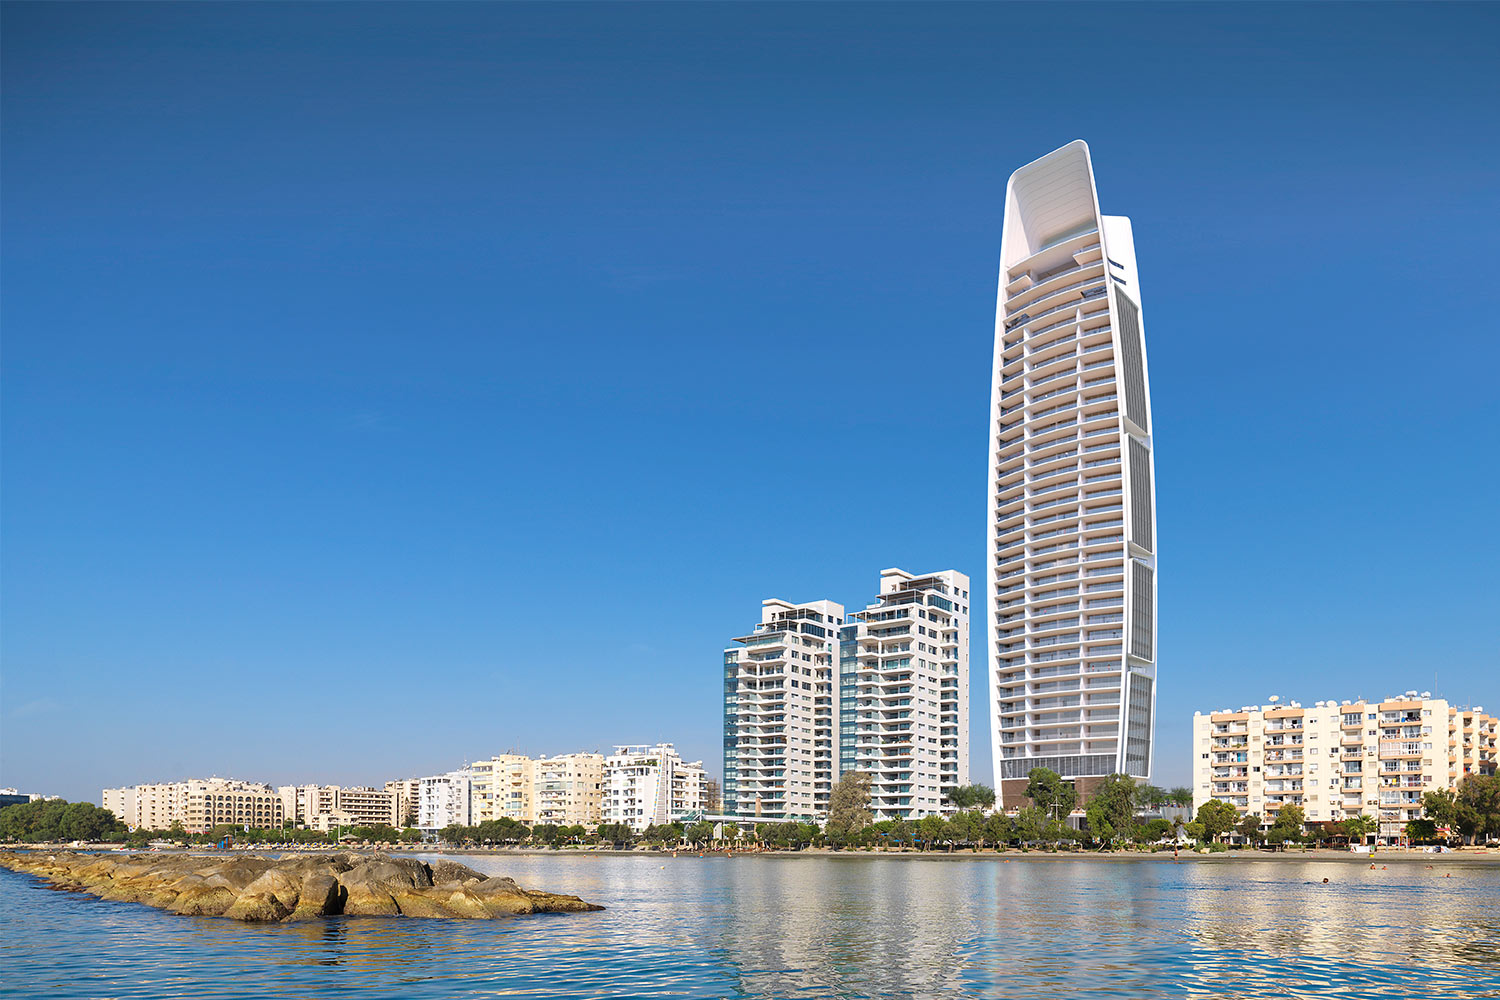 Tallest building of Cyprus - One Limassol